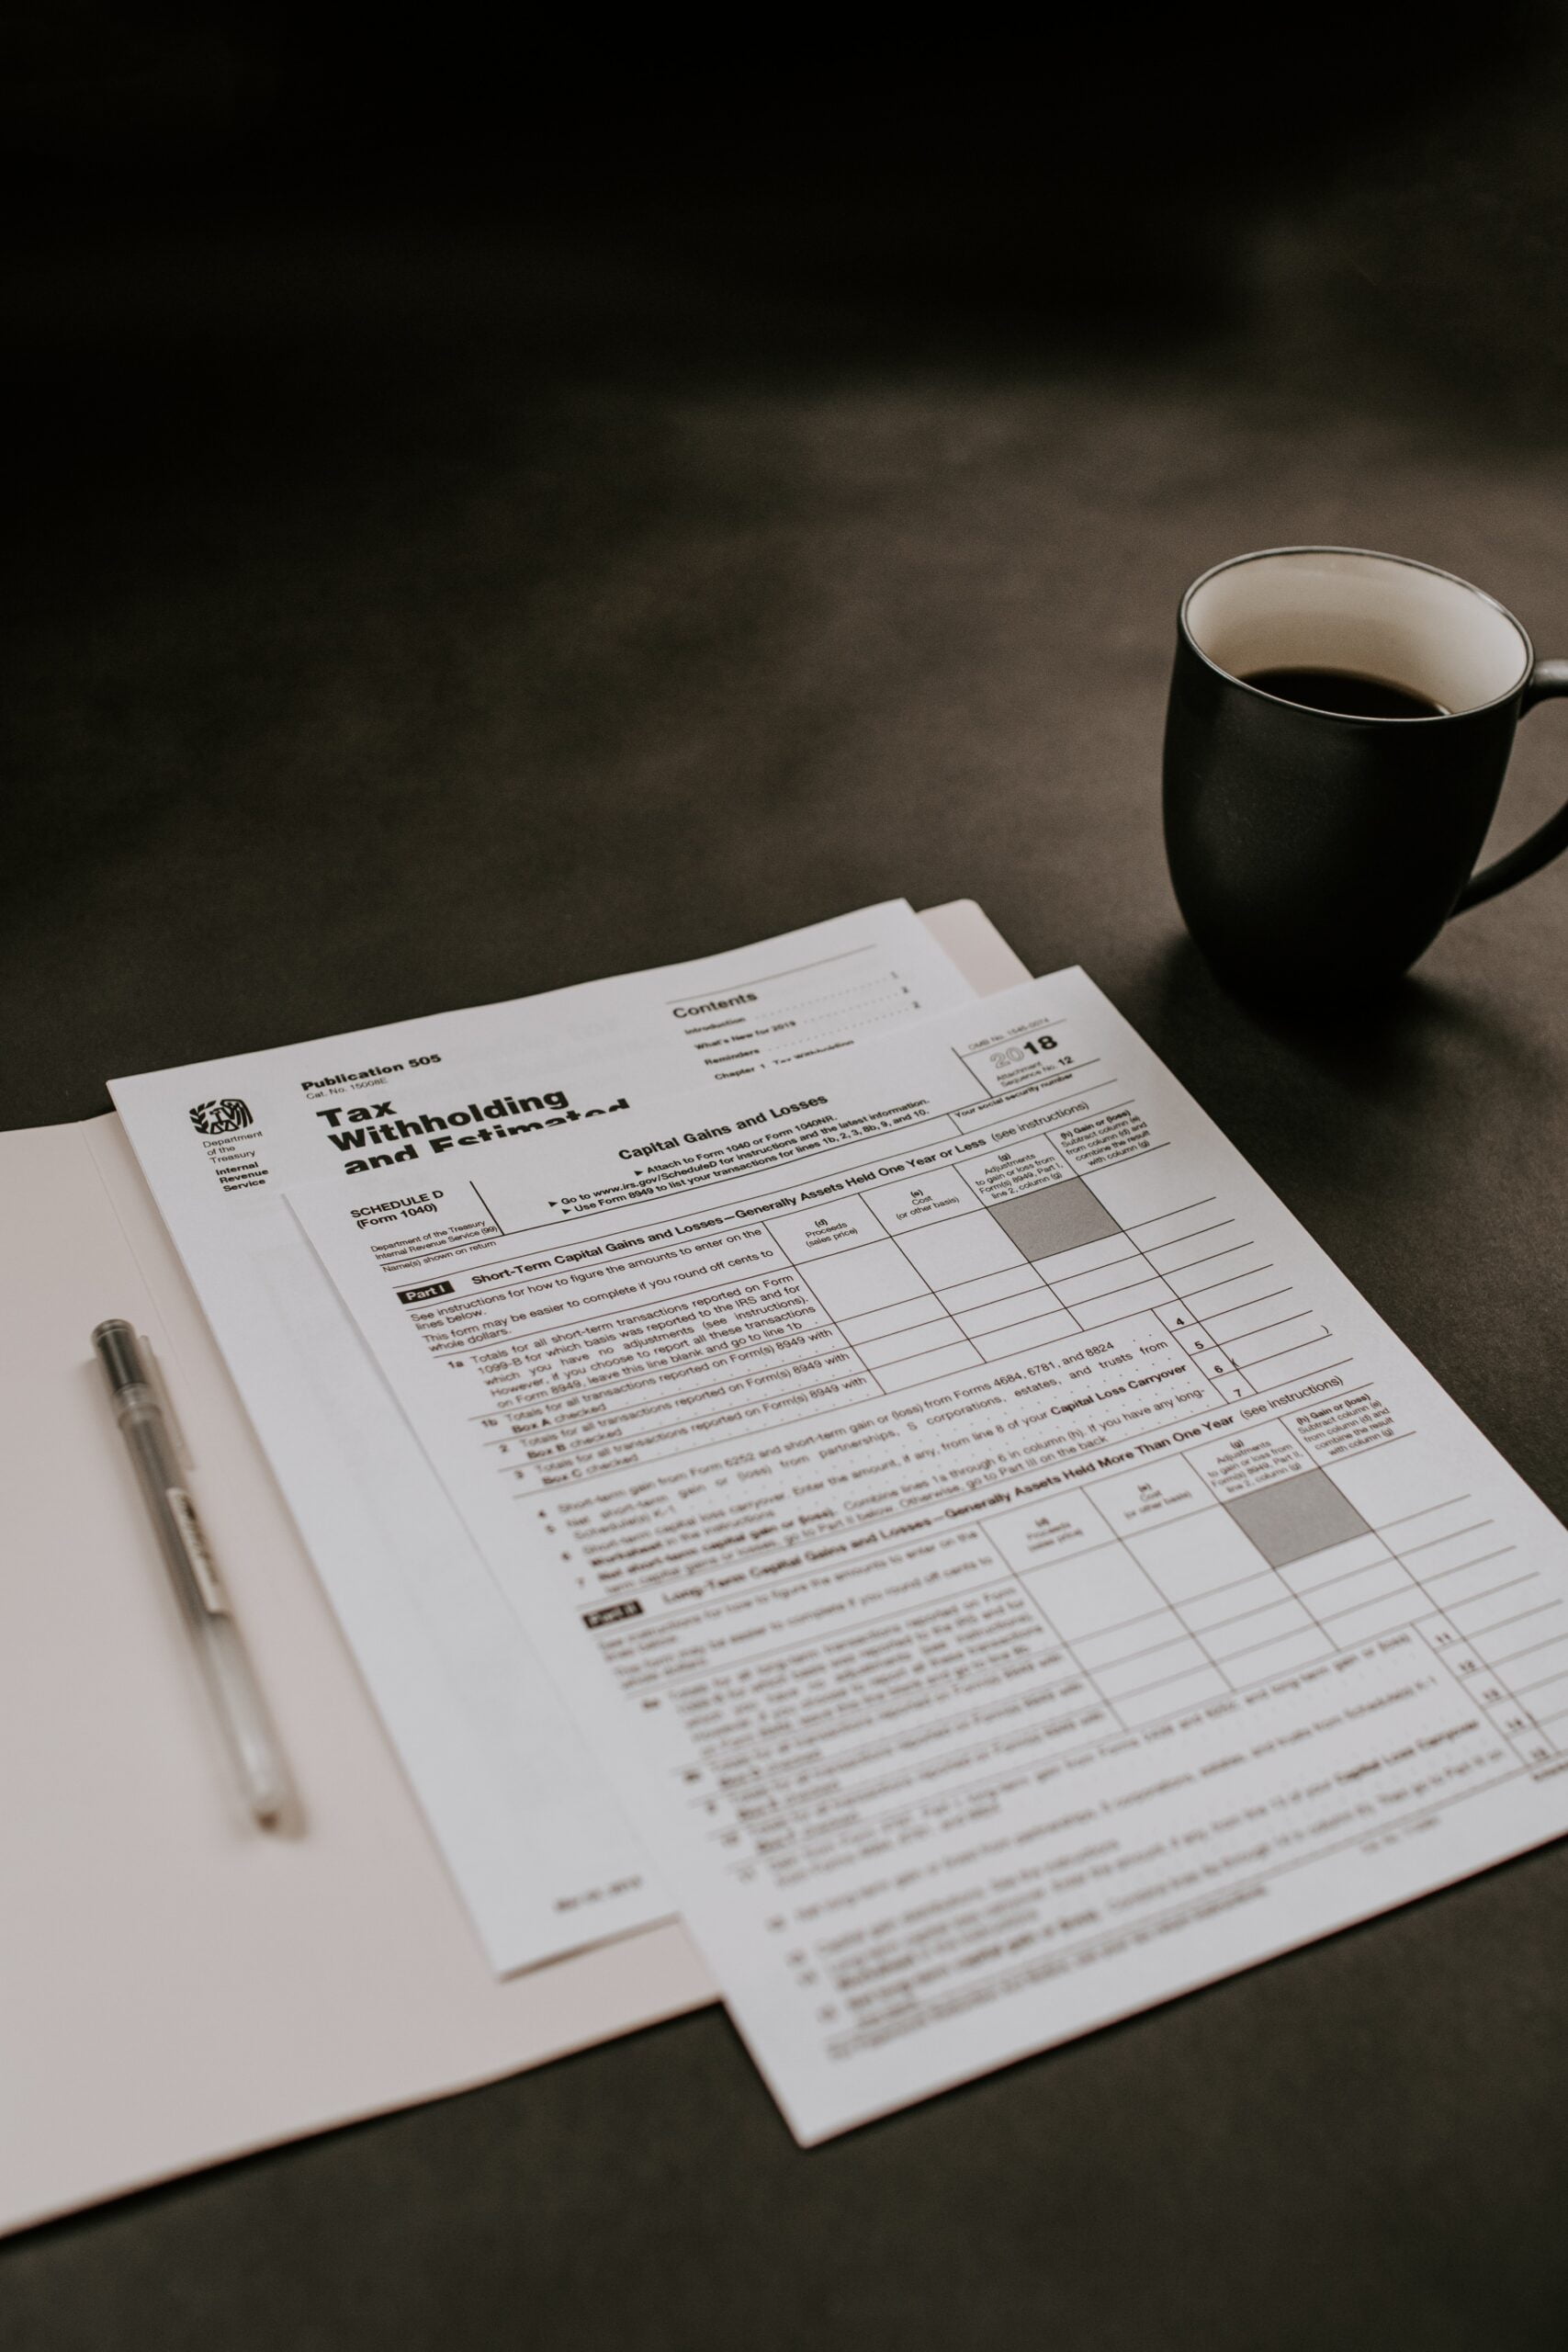 Tax doc and coffee: by Kelly Sikkema as found on Unsplash